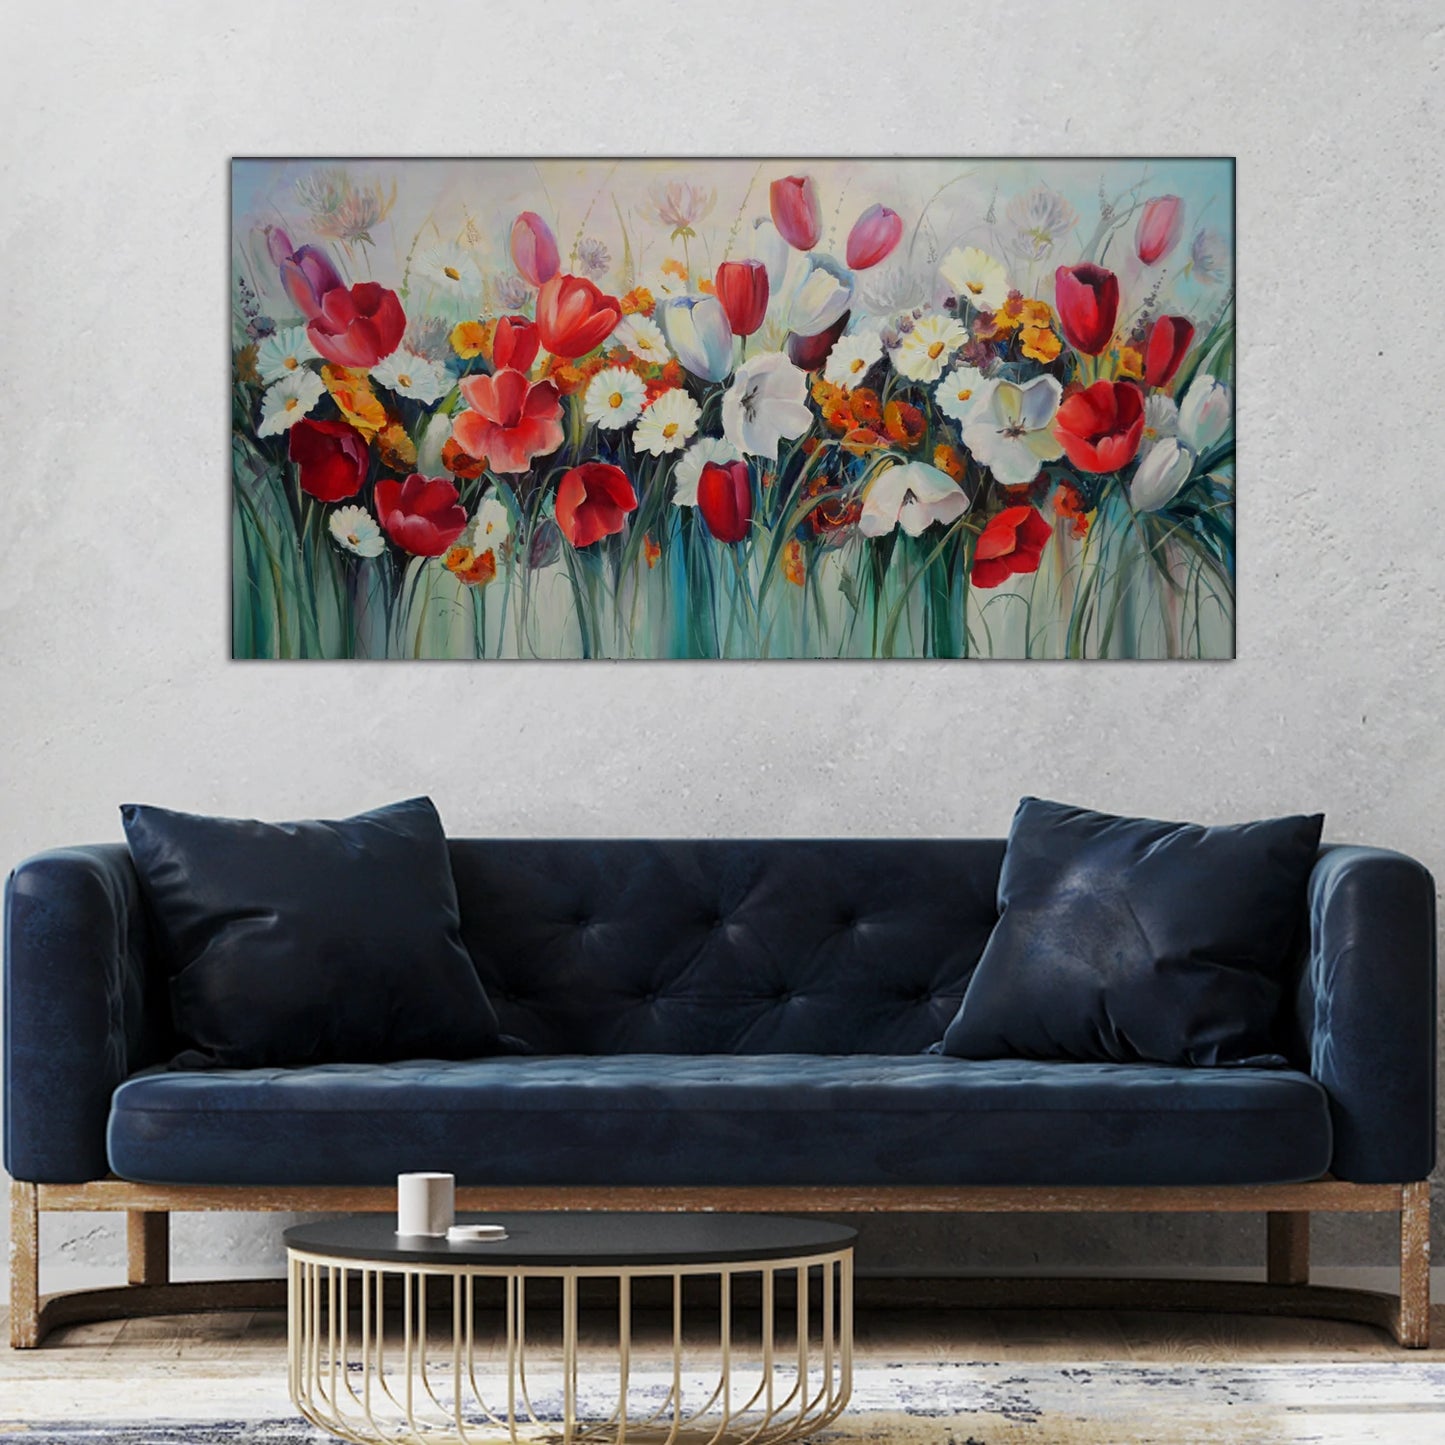 Flower Canvas Wall Painting